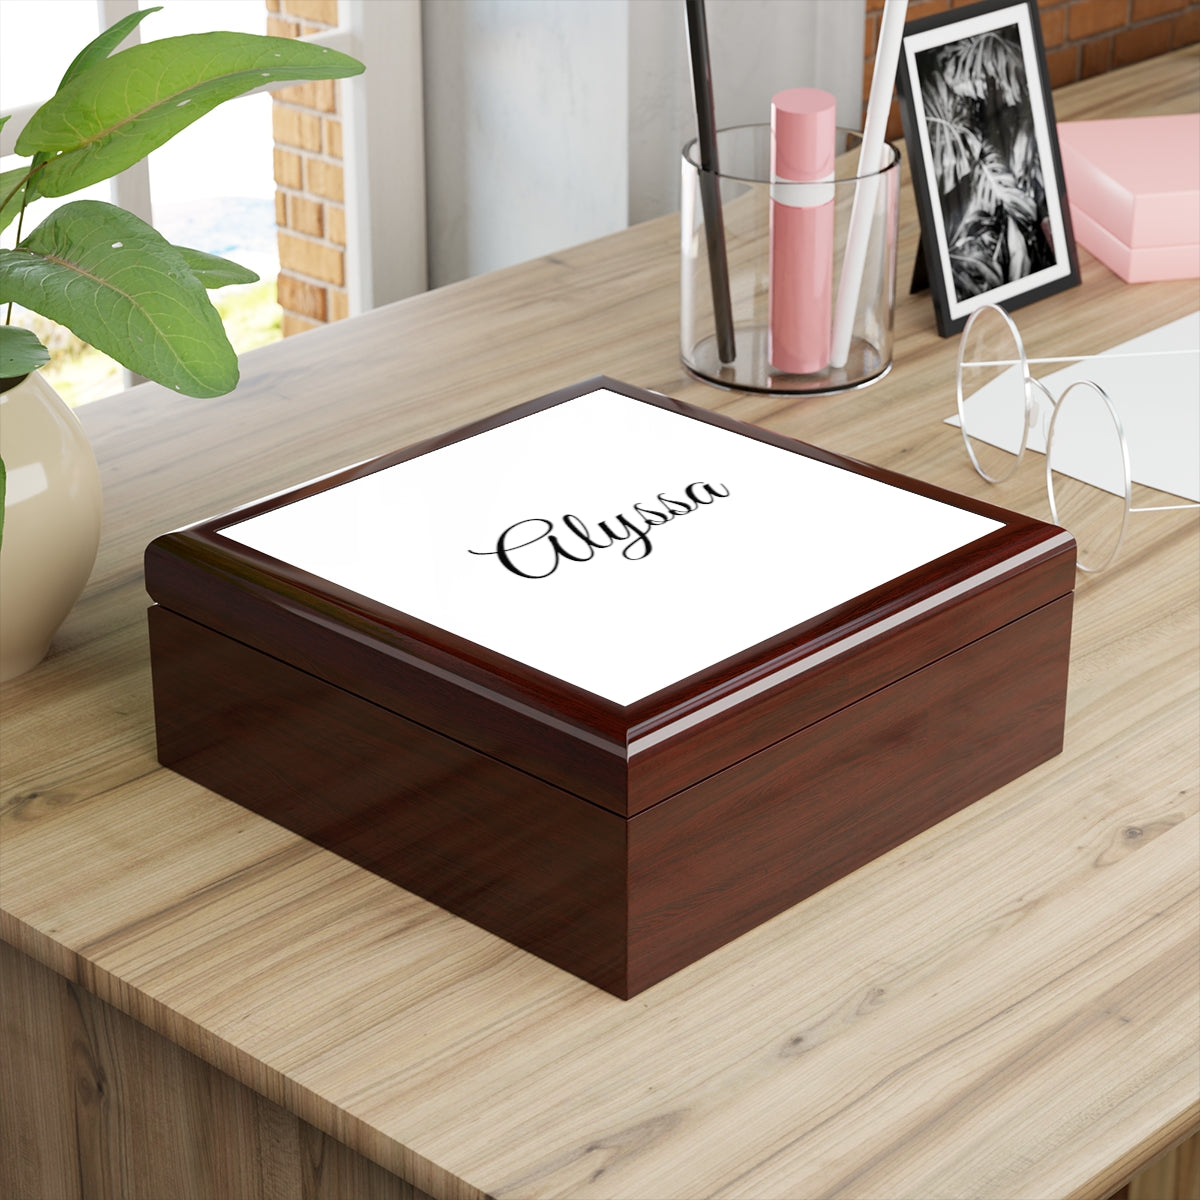 Get trendy with Personalized Jewelry Box for Bridesmaids -  available at Good Gift Company. Grab yours for $39.98 today!